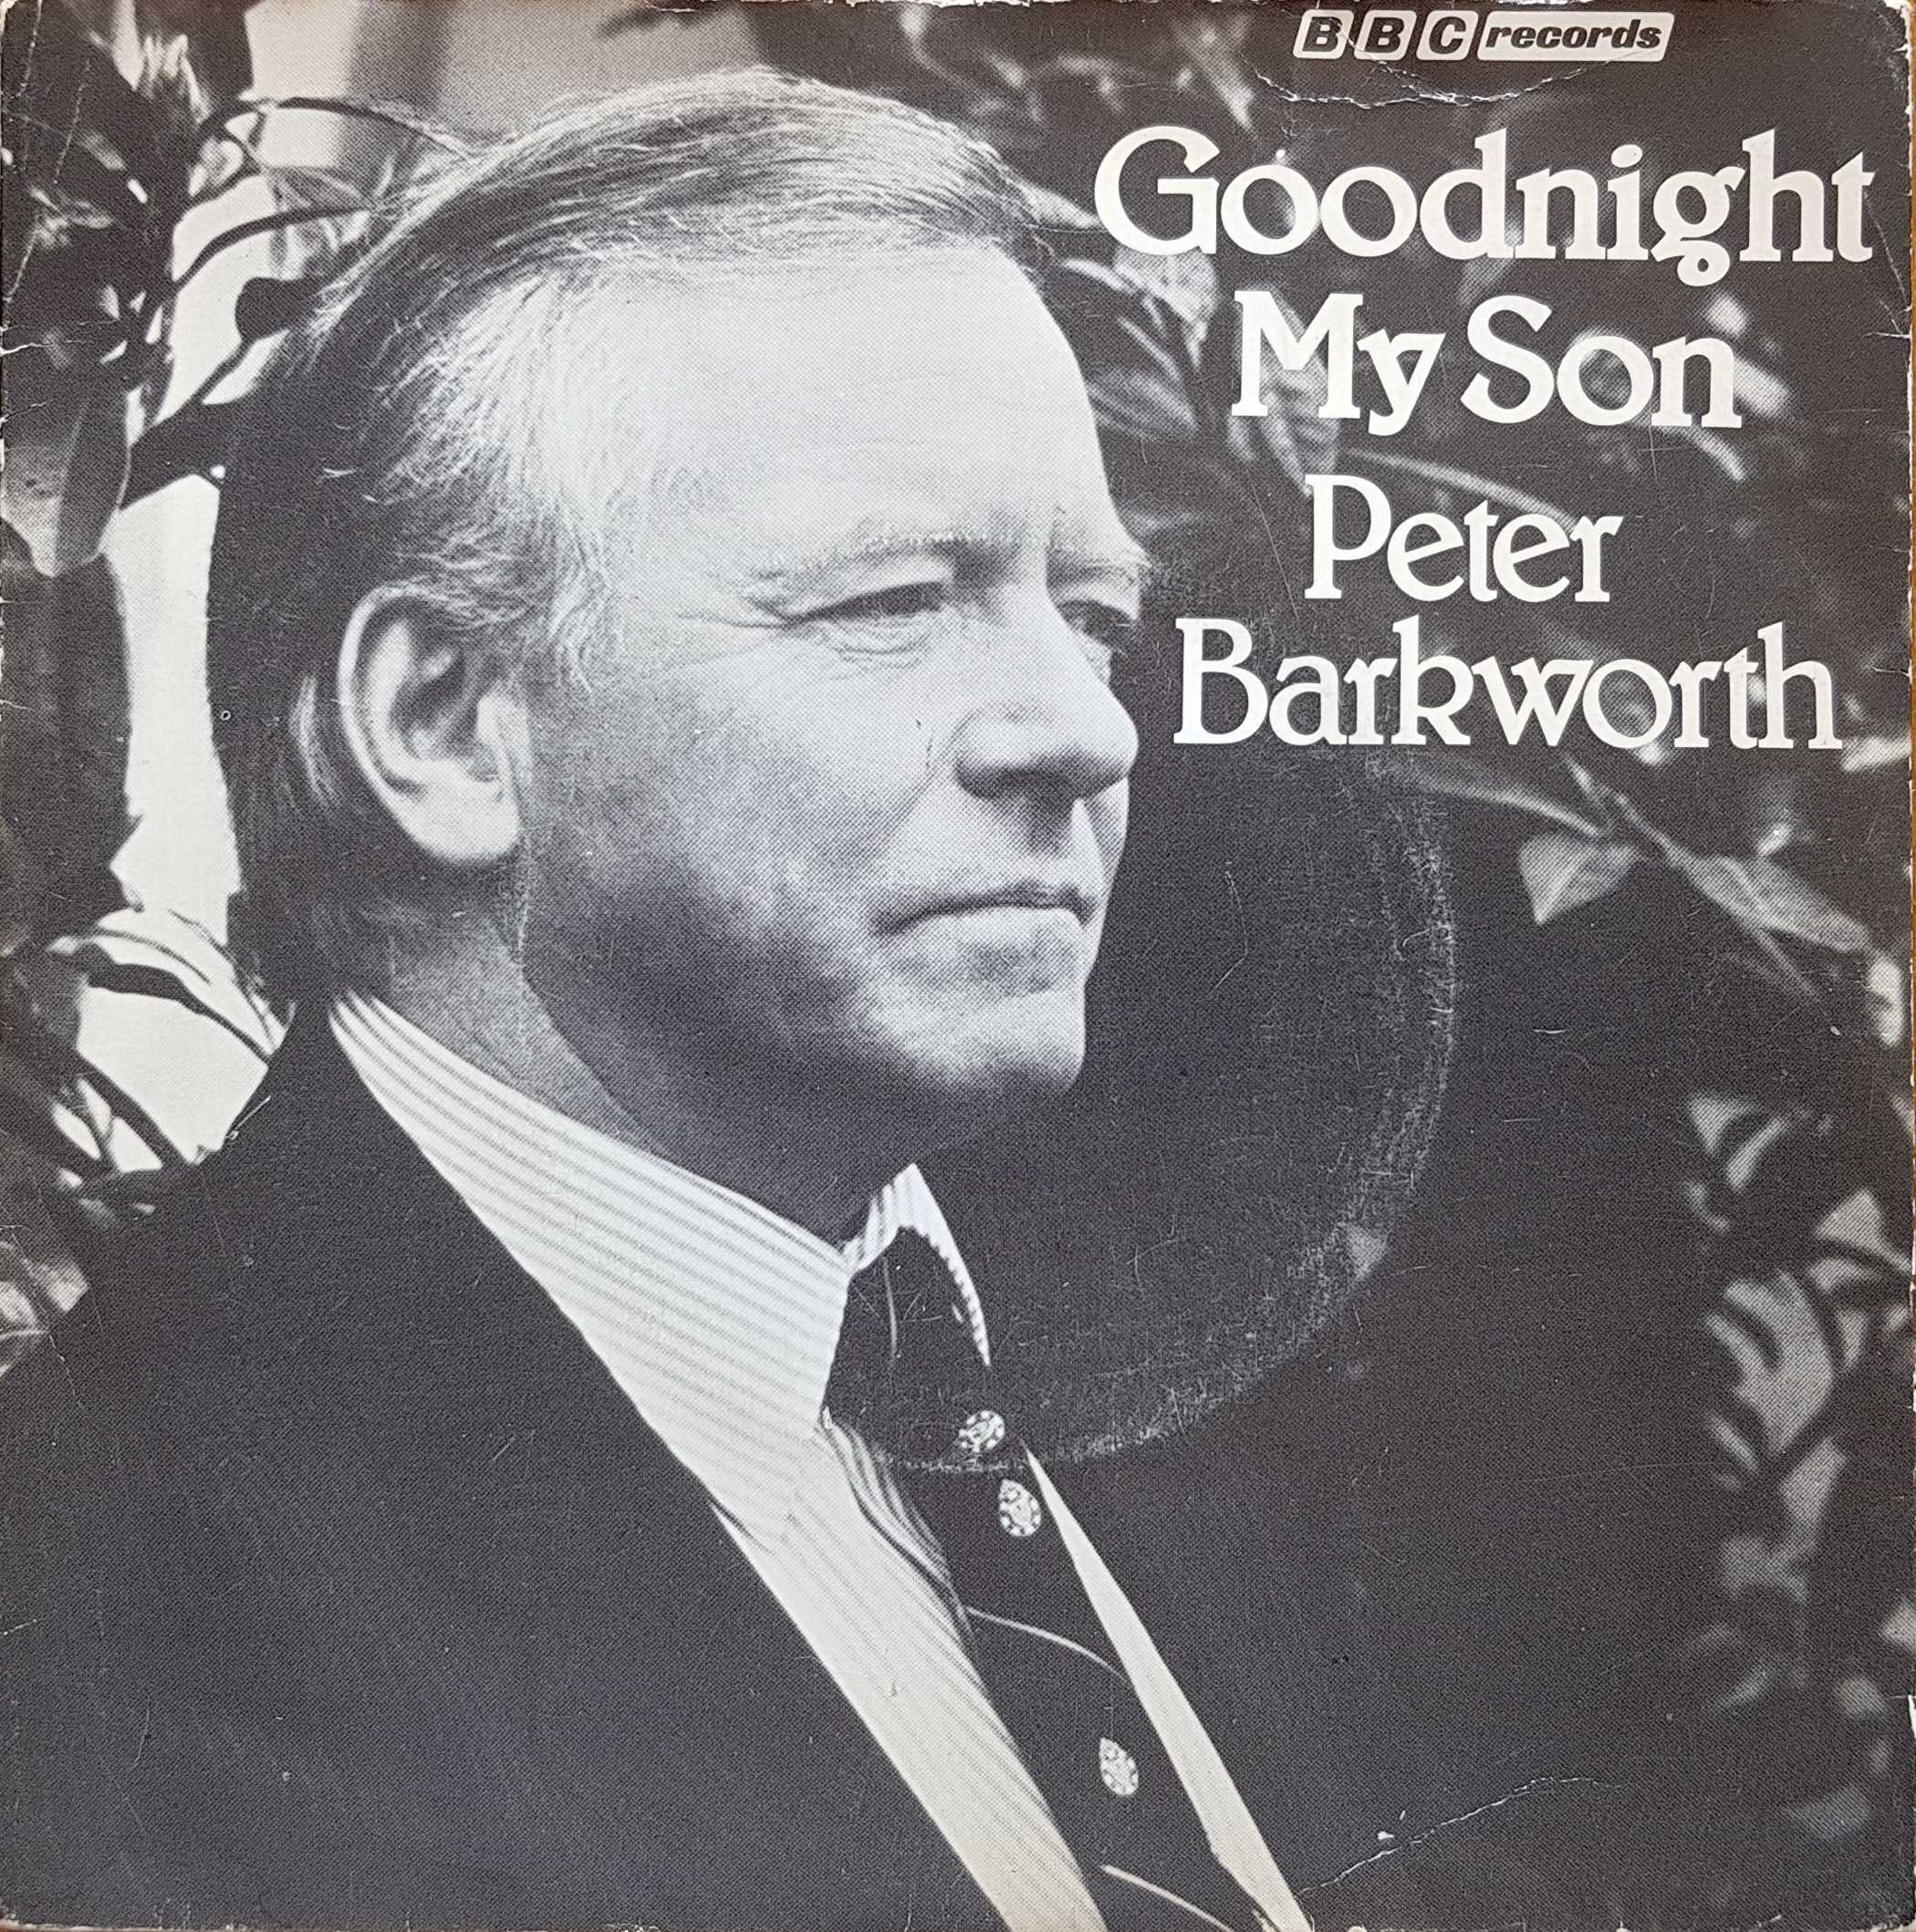 Picture of RESL 69 Goodnight my son by artist Peter Lindstrom / Michael Reed from the BBC singles - Records and Tapes library